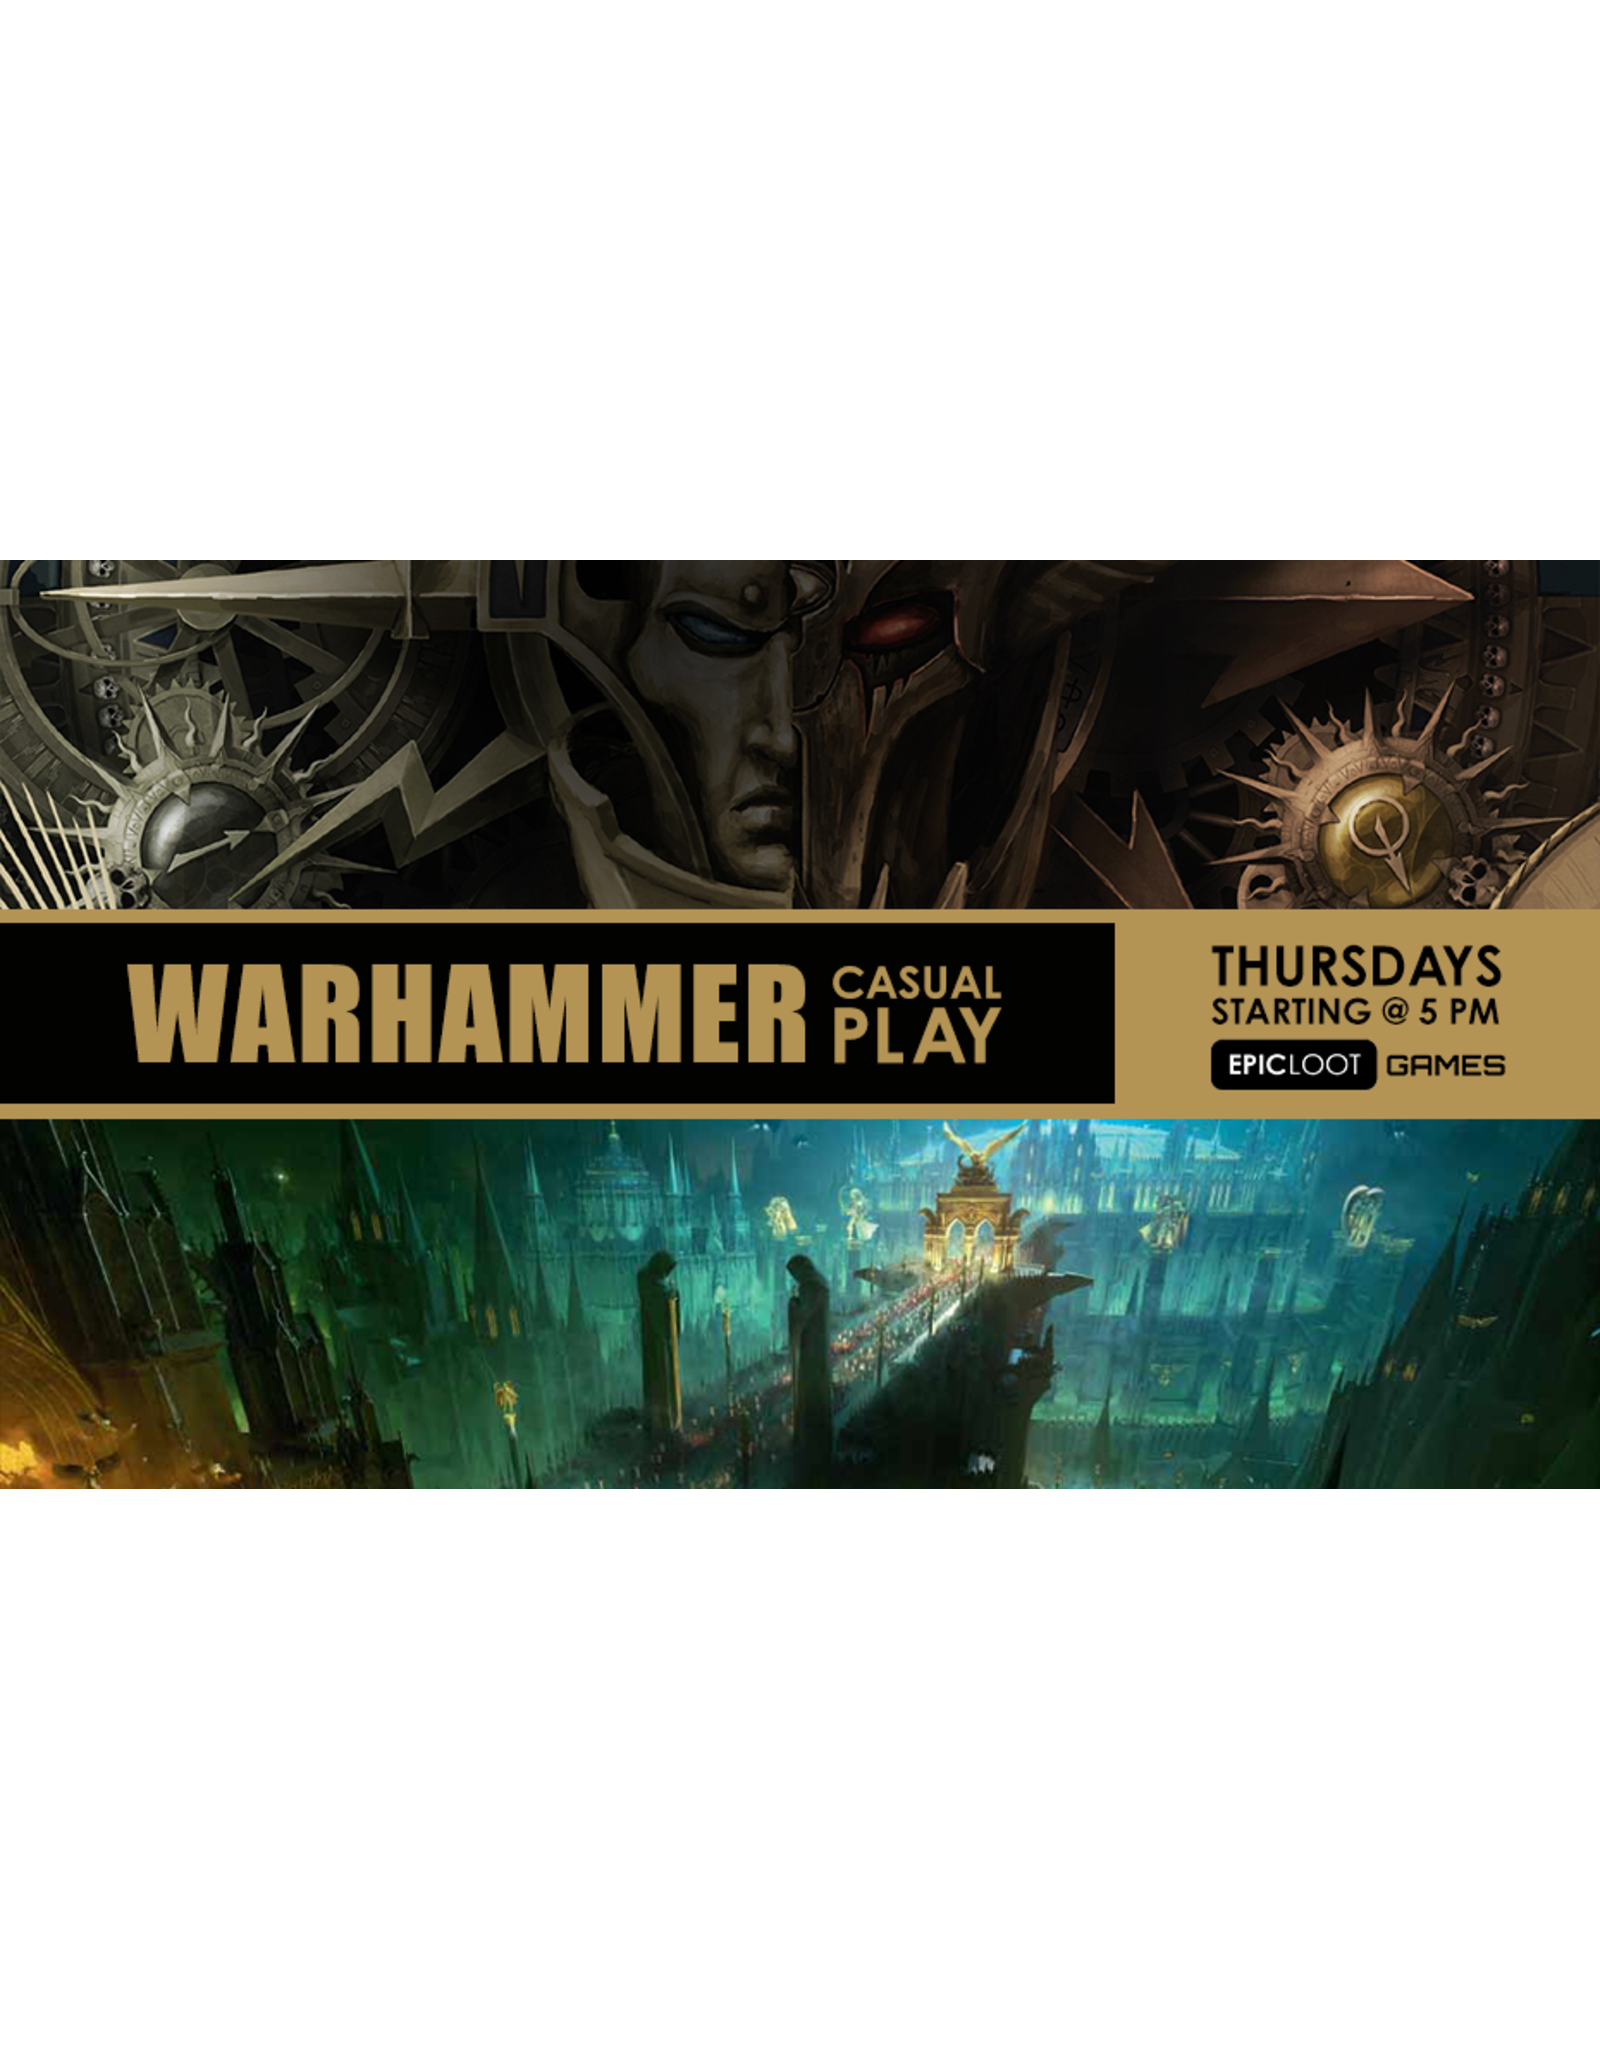 Thurs 05/02 12PM - 9PM Warhammer Casual Play